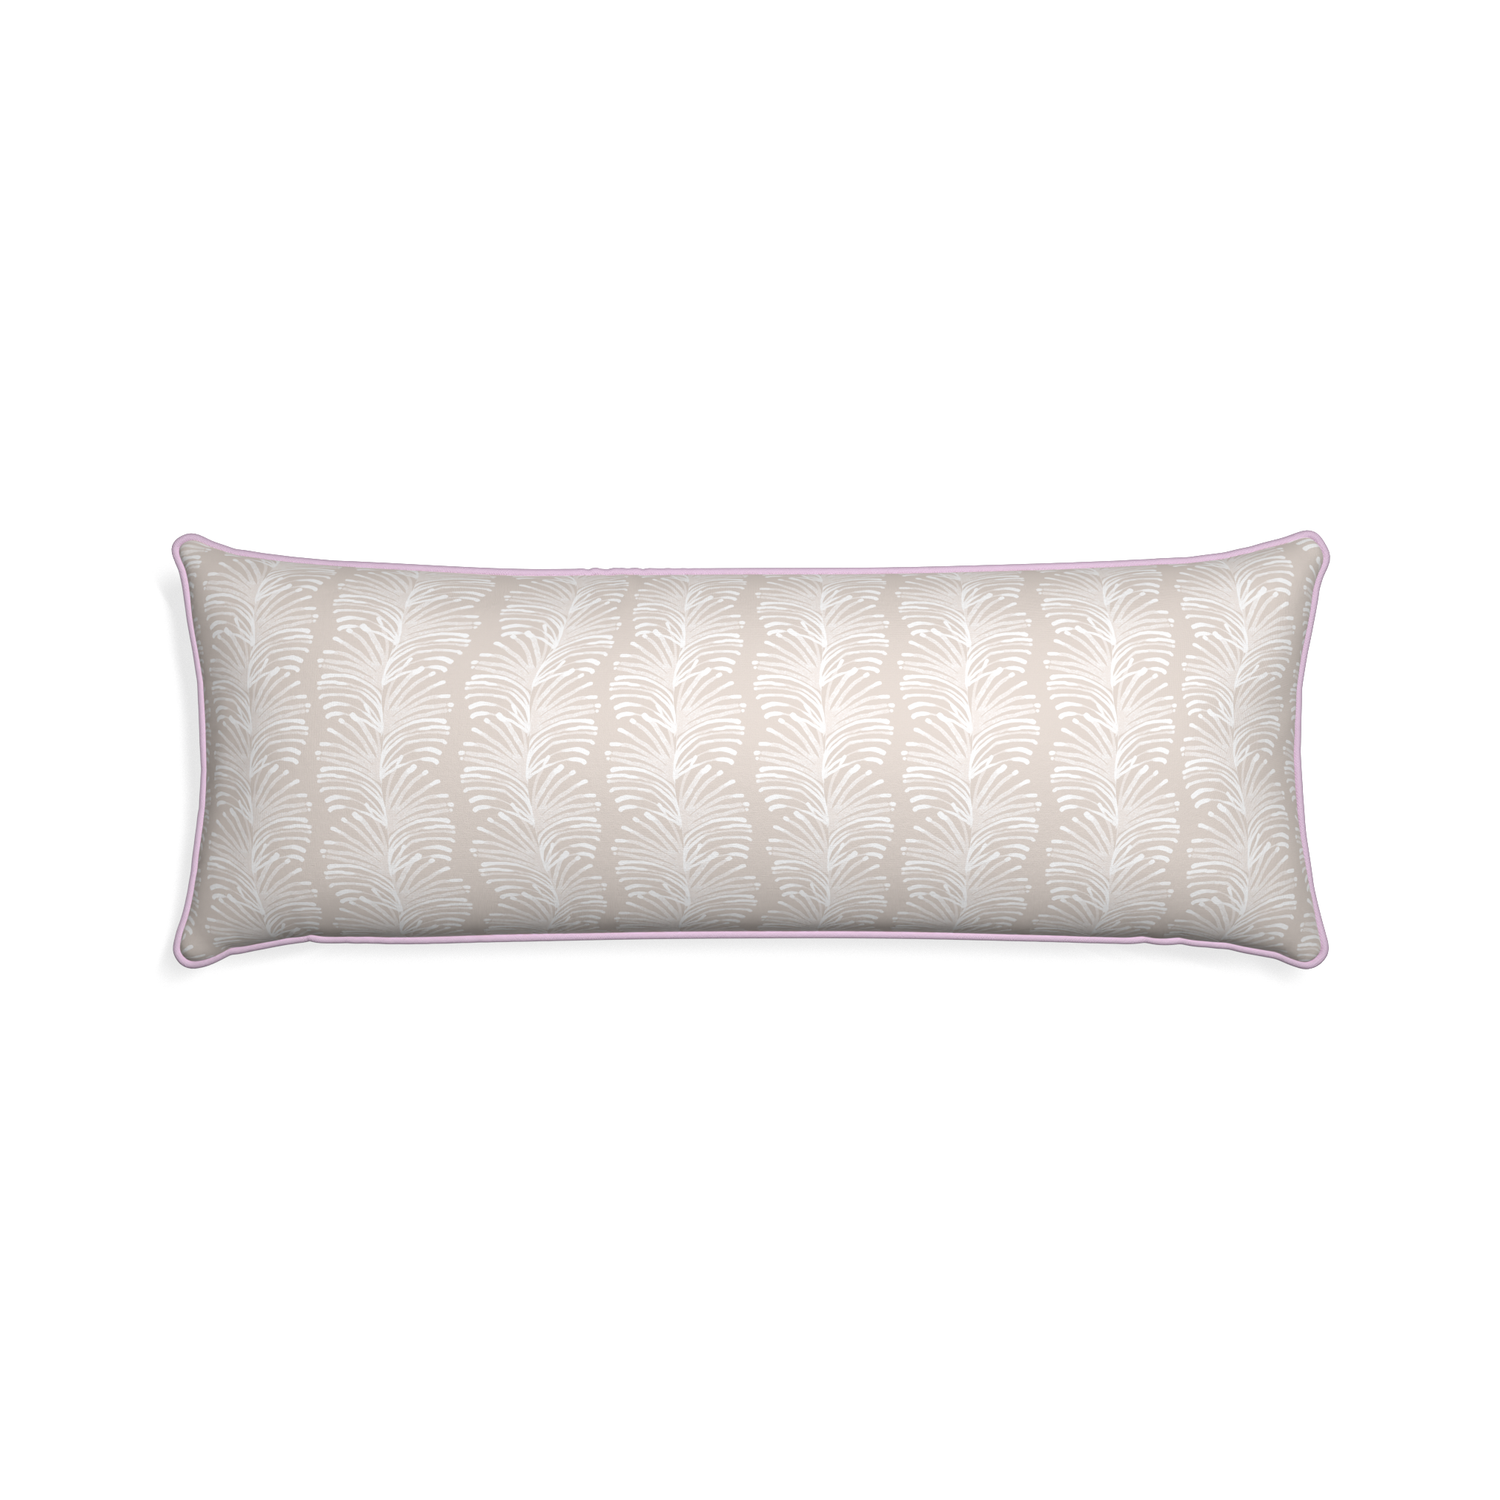 Xl-lumbar emma sand custom pillow with l piping on white background